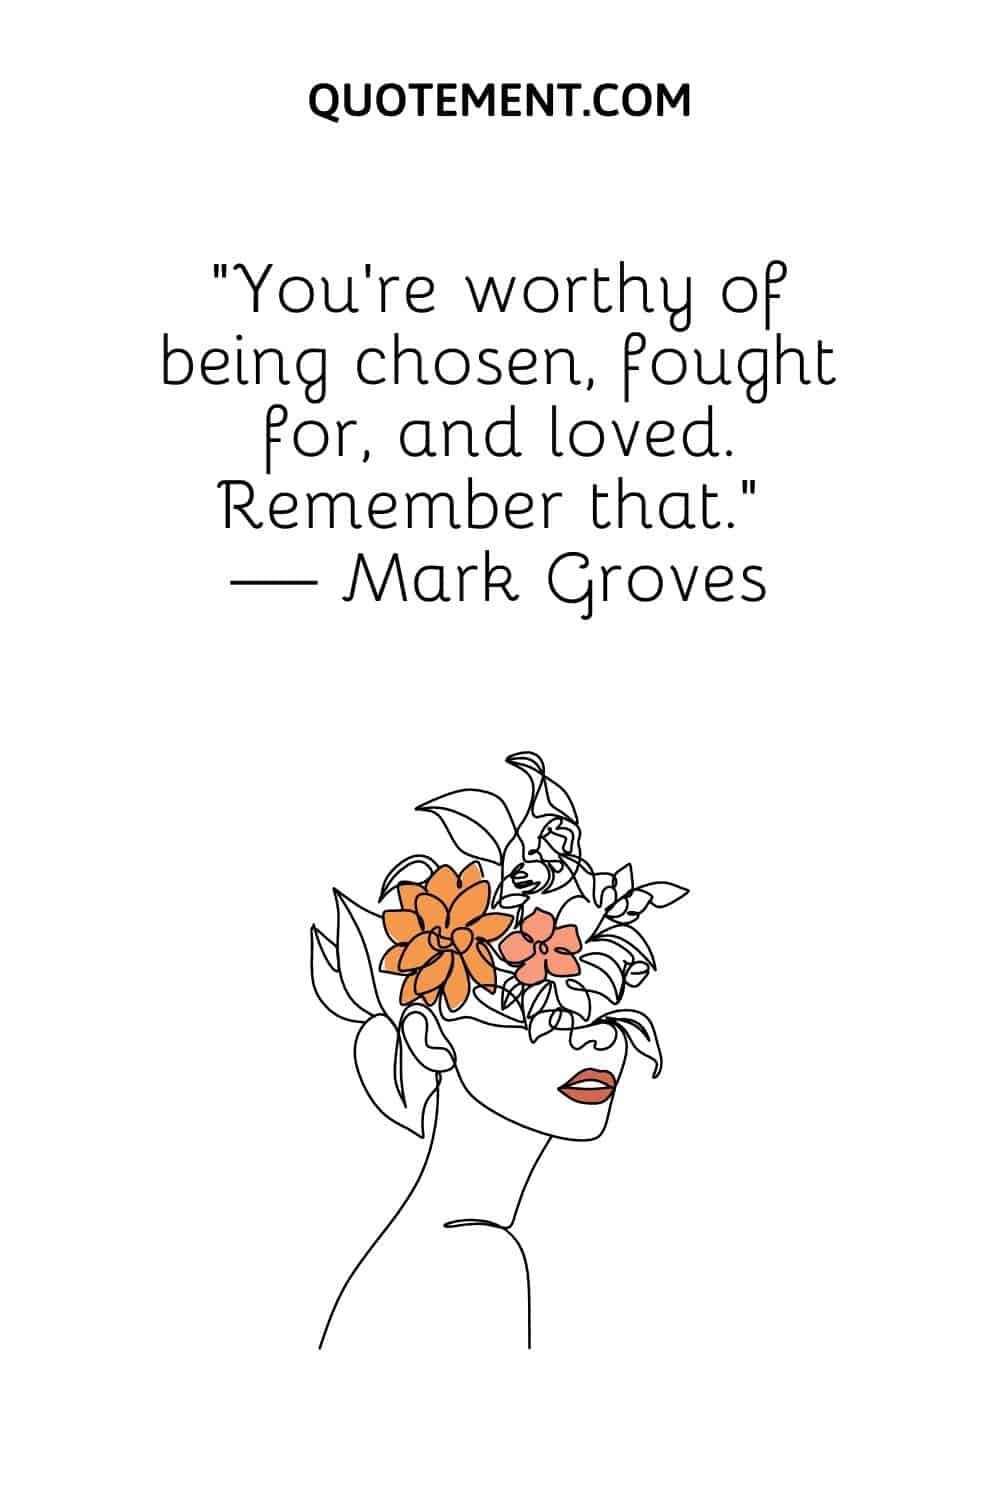 flowers on a woman's head image representing you are worth it quote